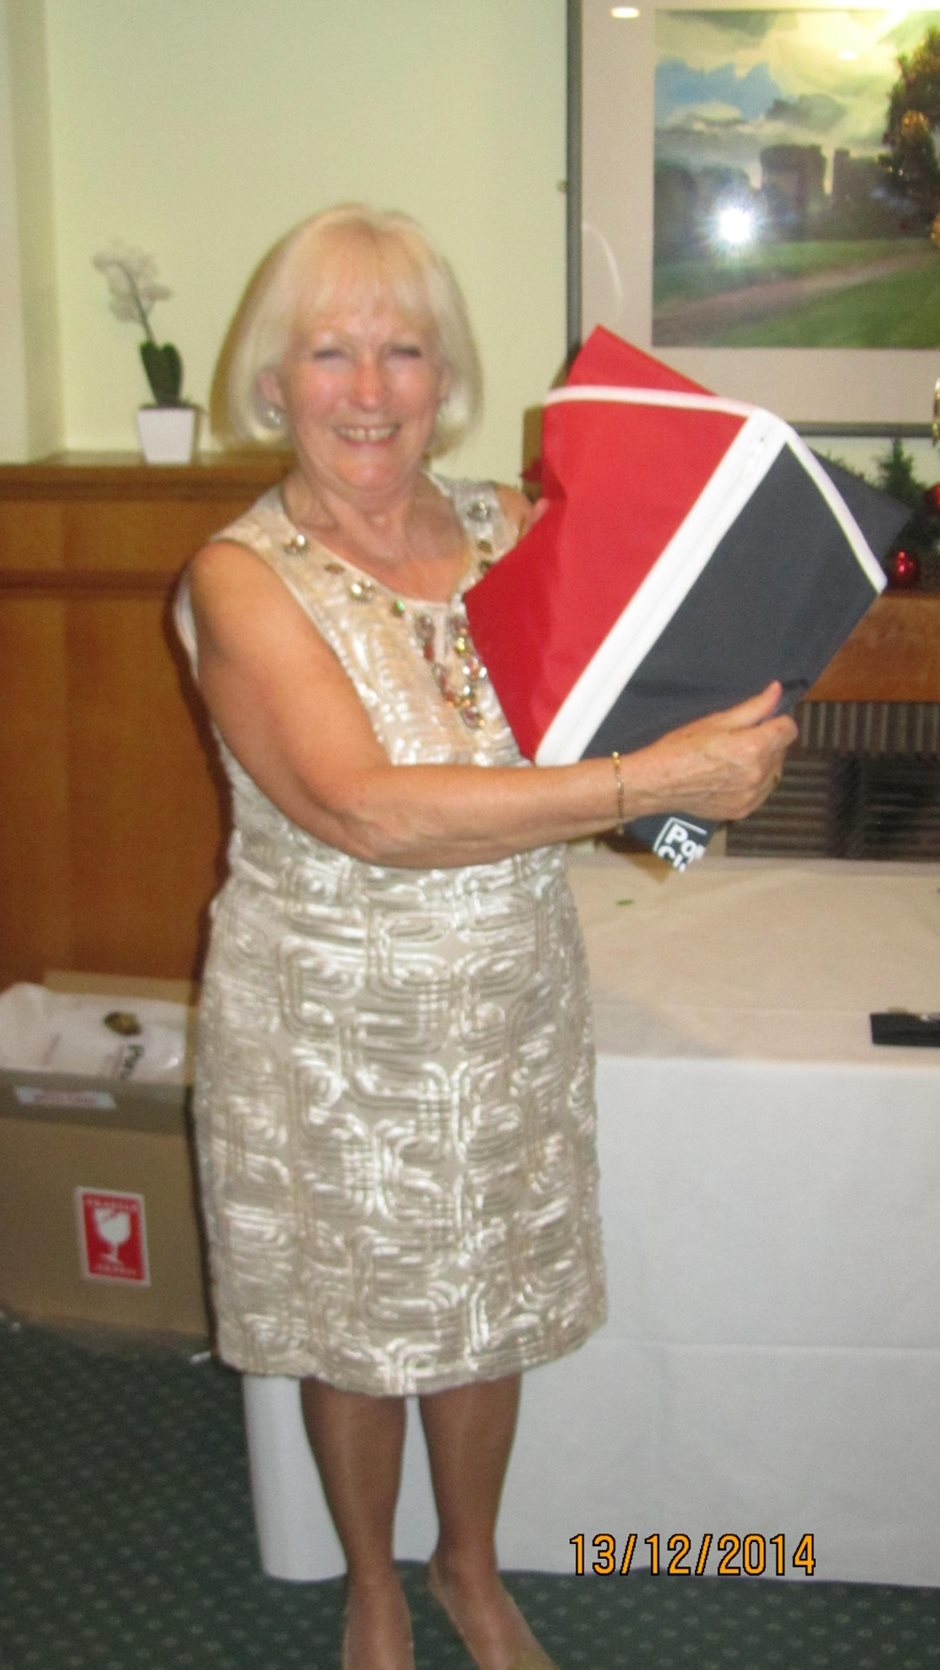 Photo 37 from the R29 2014 Christmas Dinner gallery